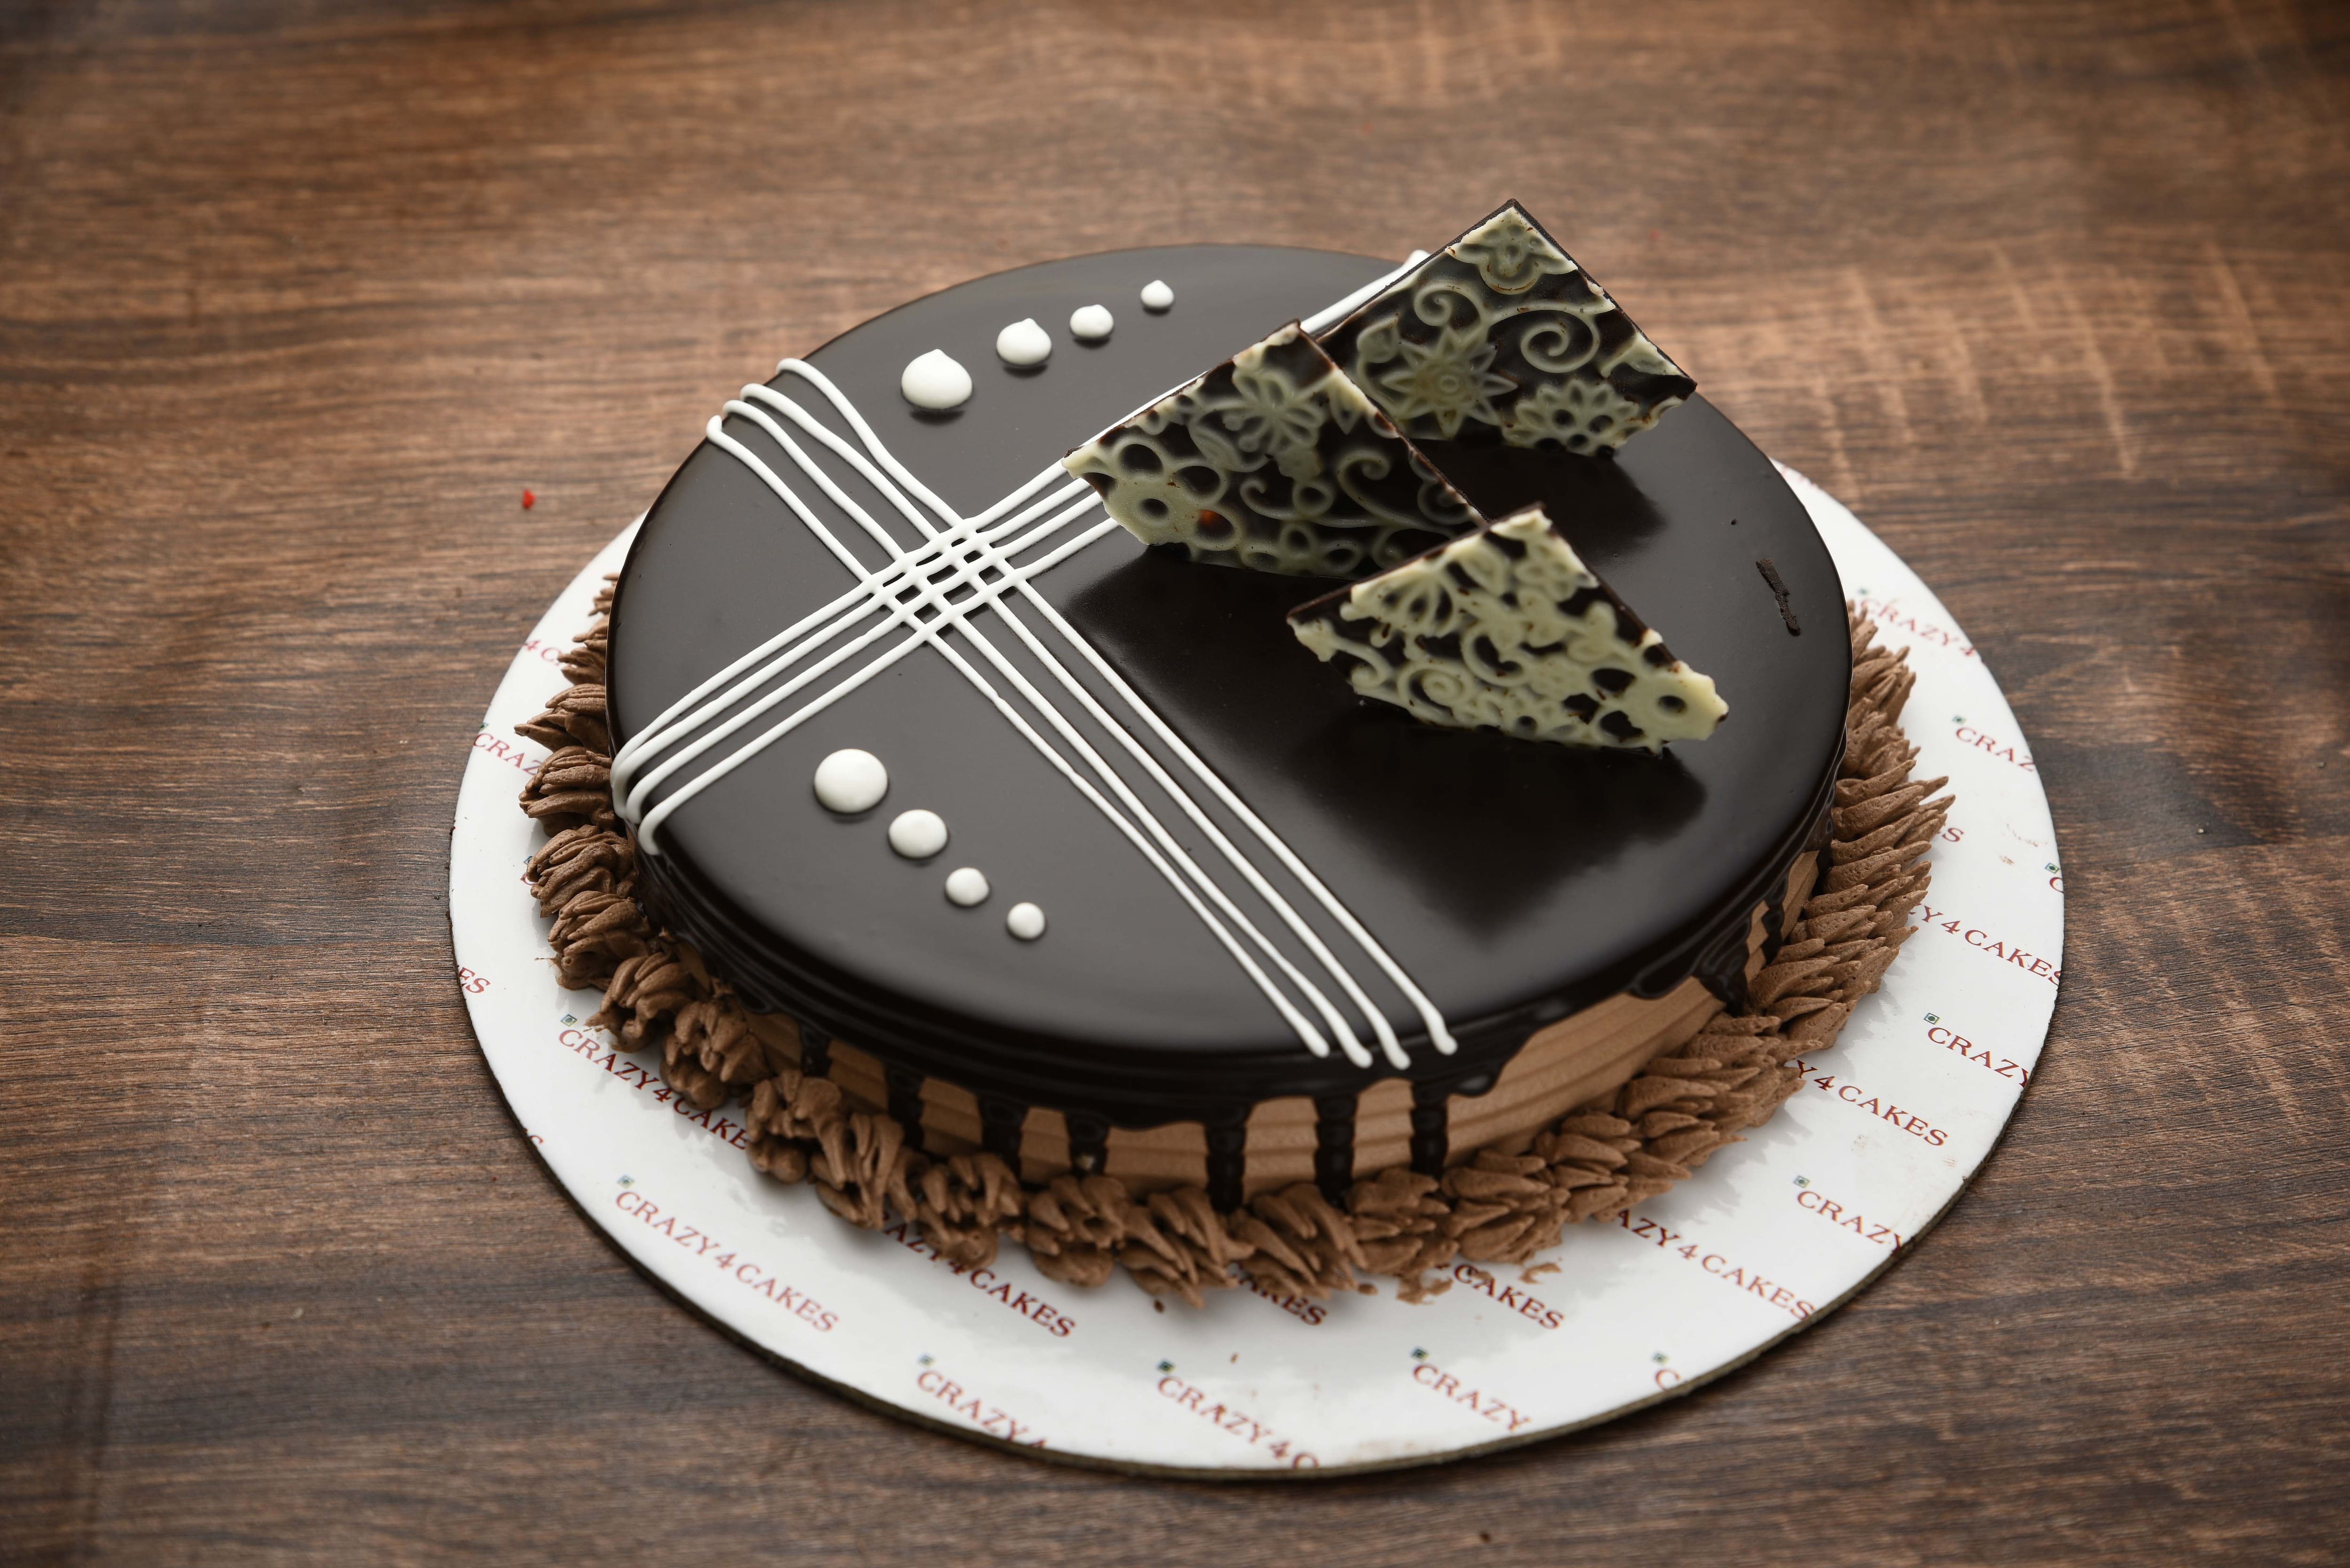 Exquisite Chocolate Decorations on a Fancy Cake